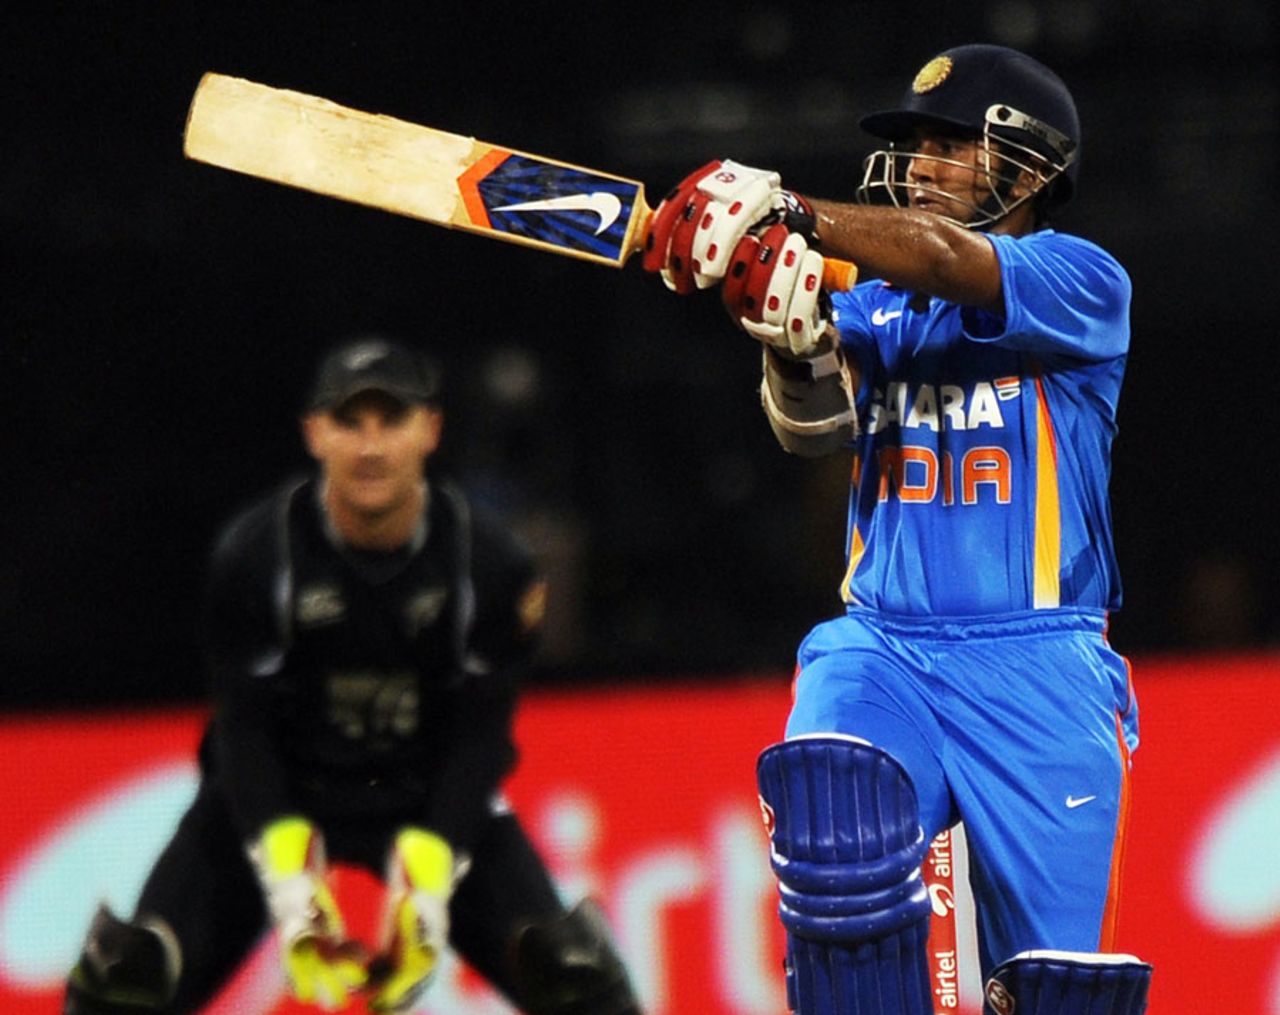 Parthiv Patel plays a pull shot during his half-century, India v New Zealand, 4th ODI, Bangalore, December 7, 2010